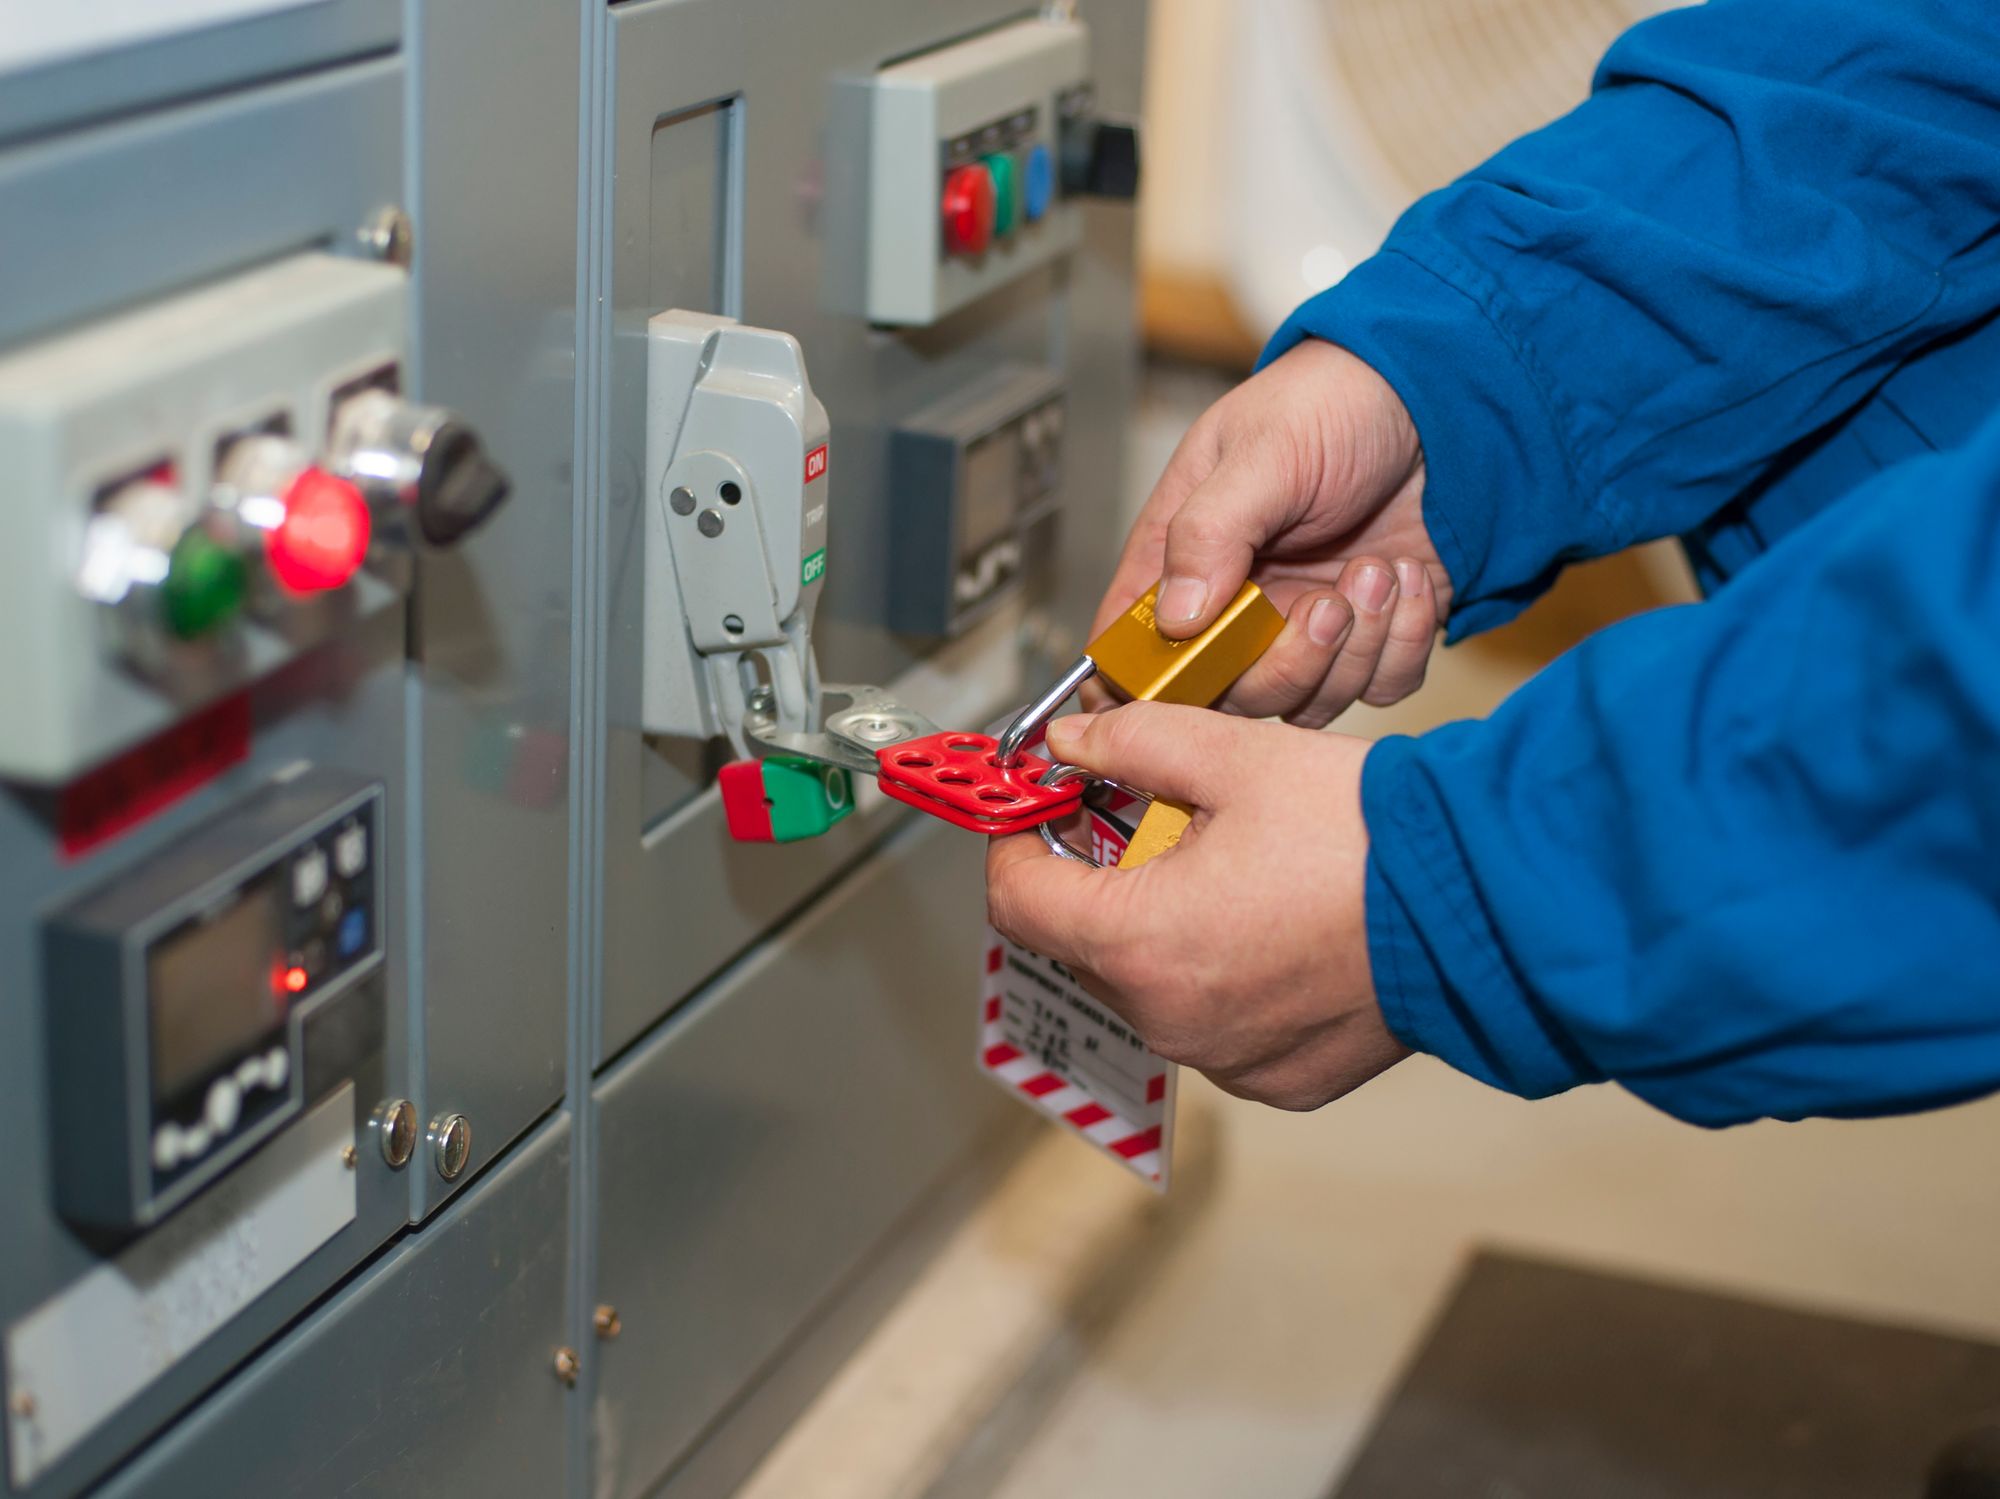 What are the requirements for lockout/tagout devices?